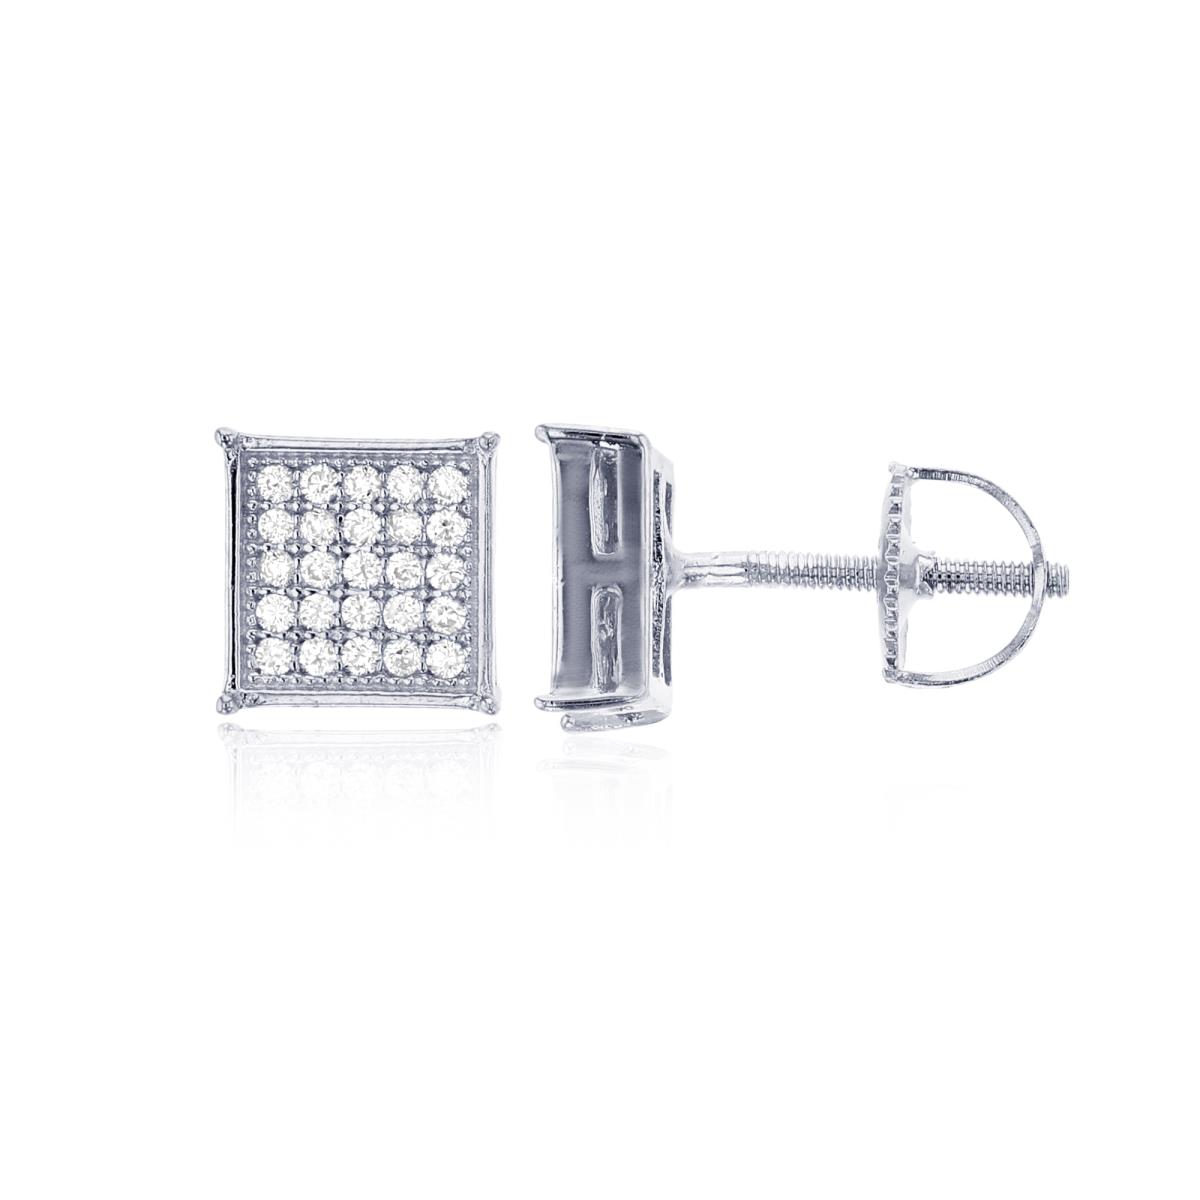 Sterling Silver Rhodium Micropave 5x5 Square Screw-Back Mens Stud Earring